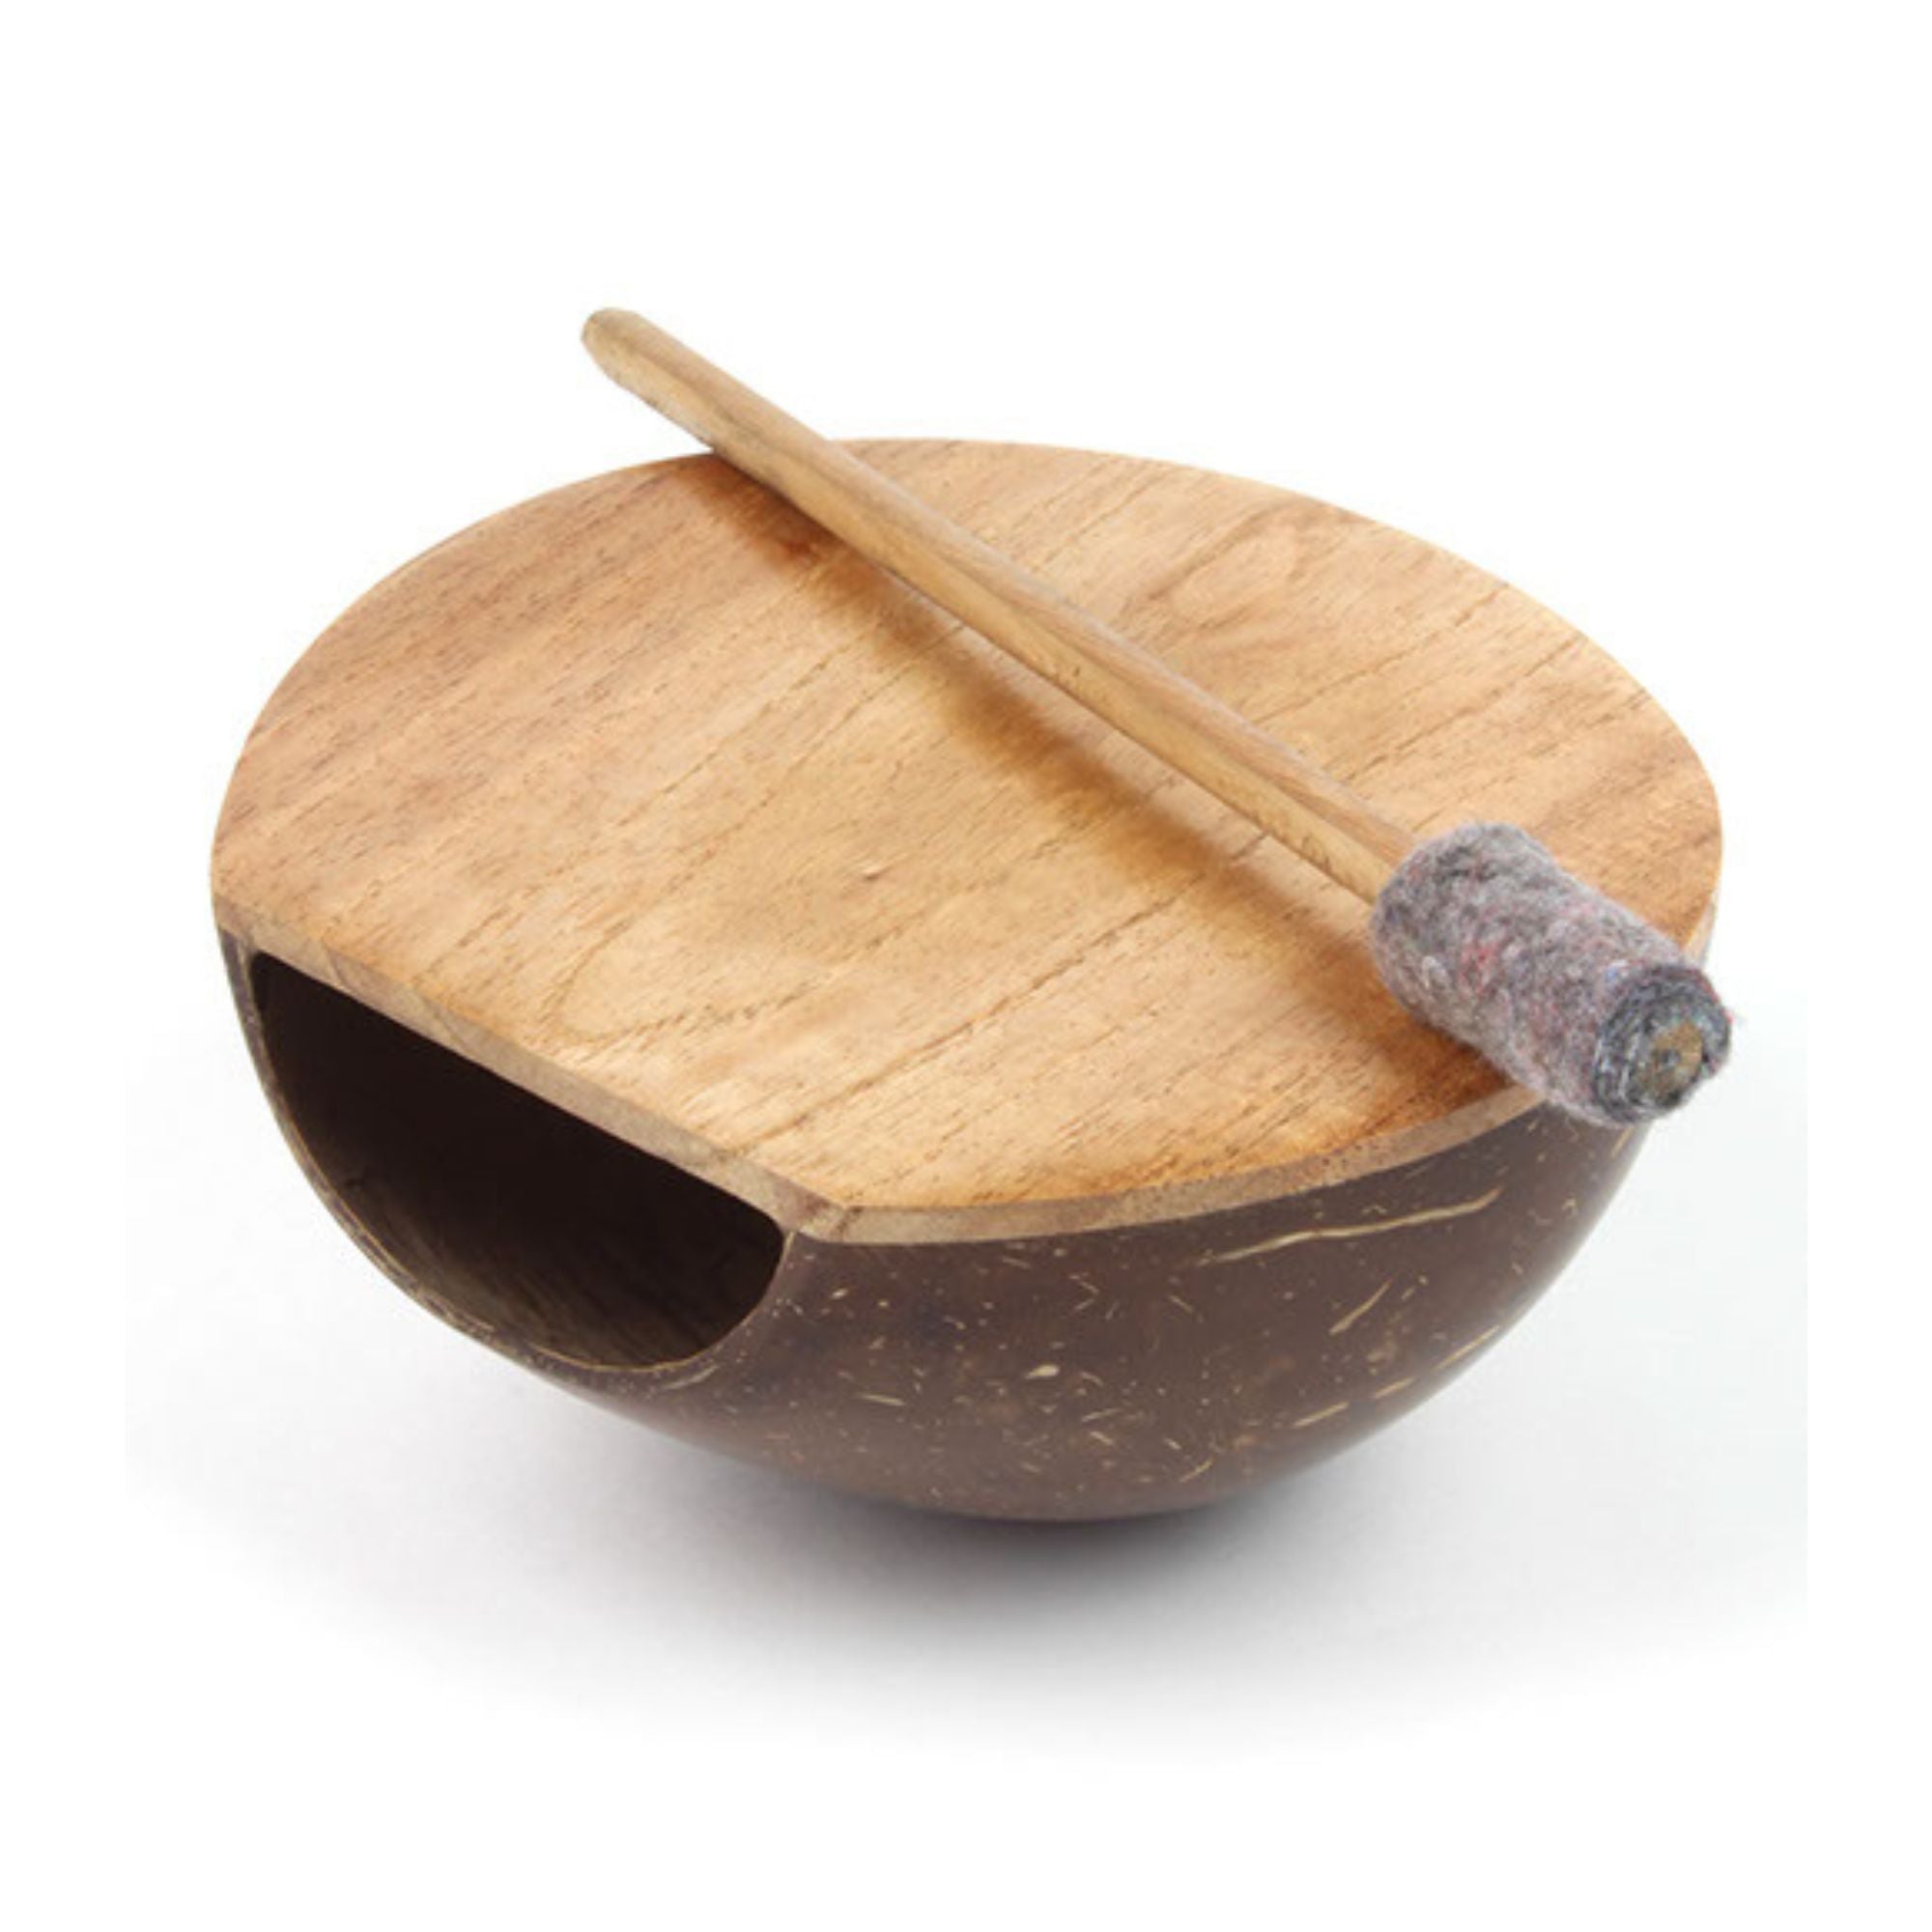 Coconut drum with wooden top and resonance hole